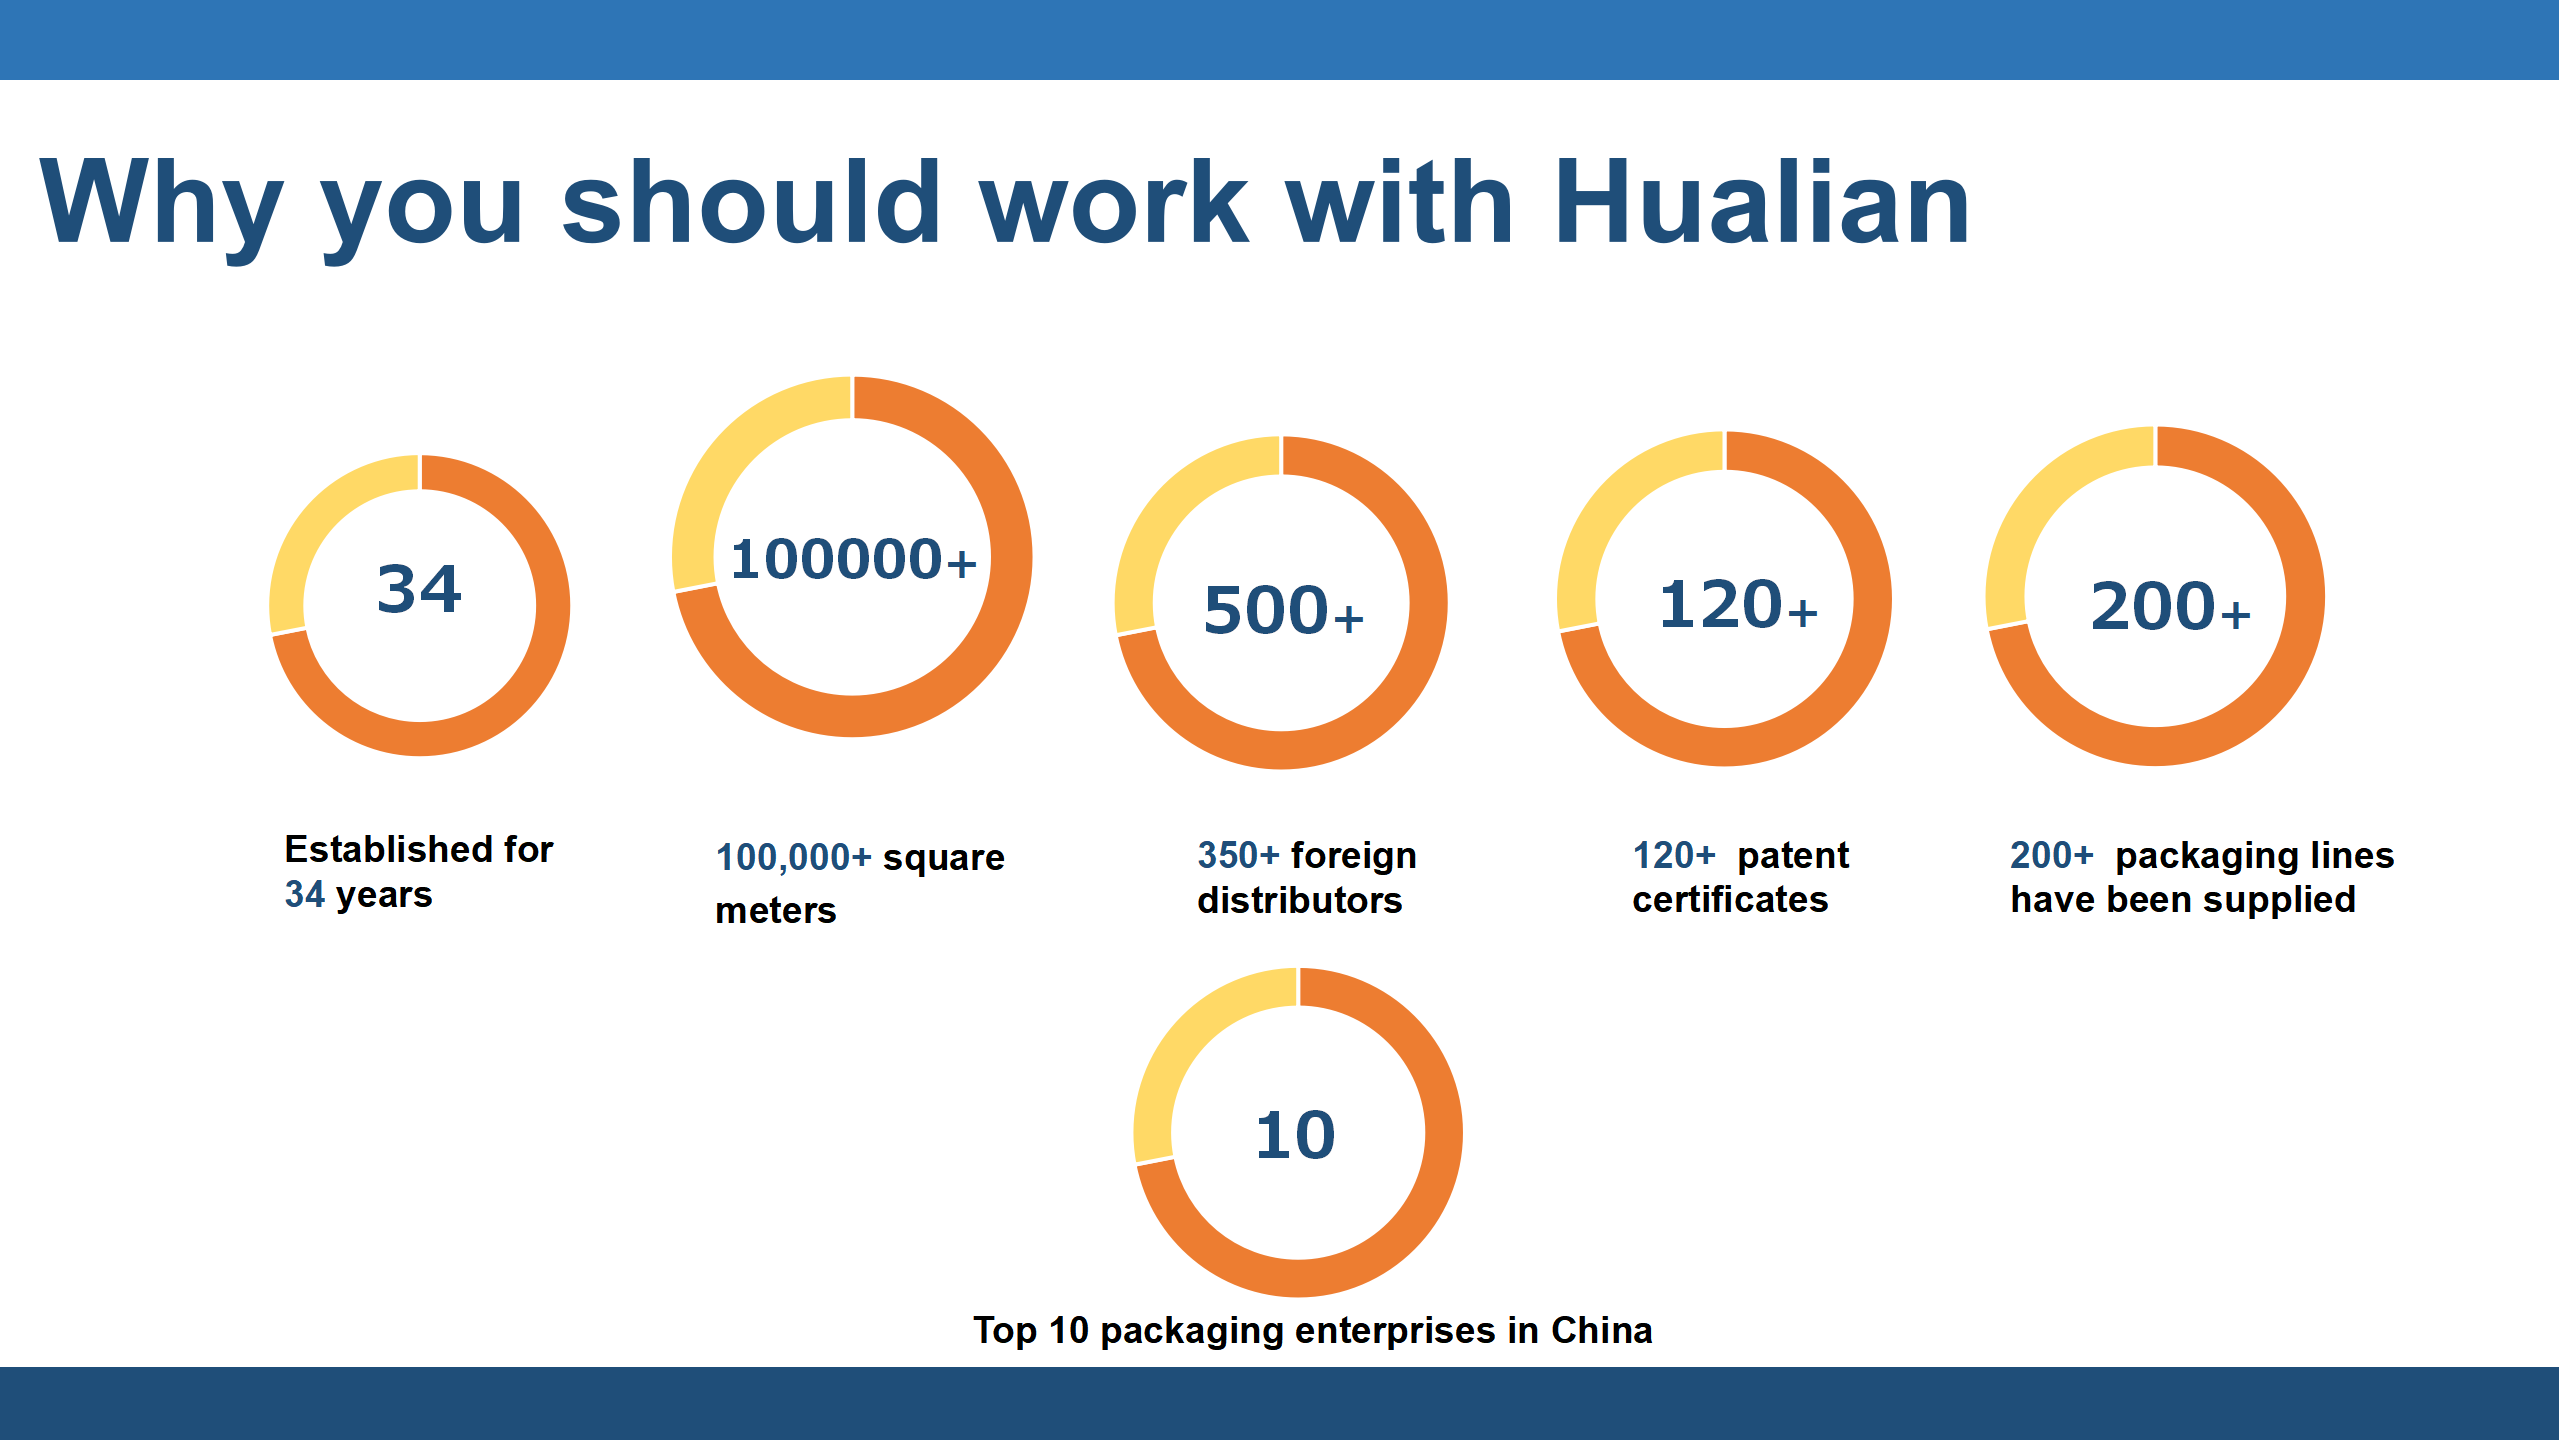 Why you should work with Hualian?